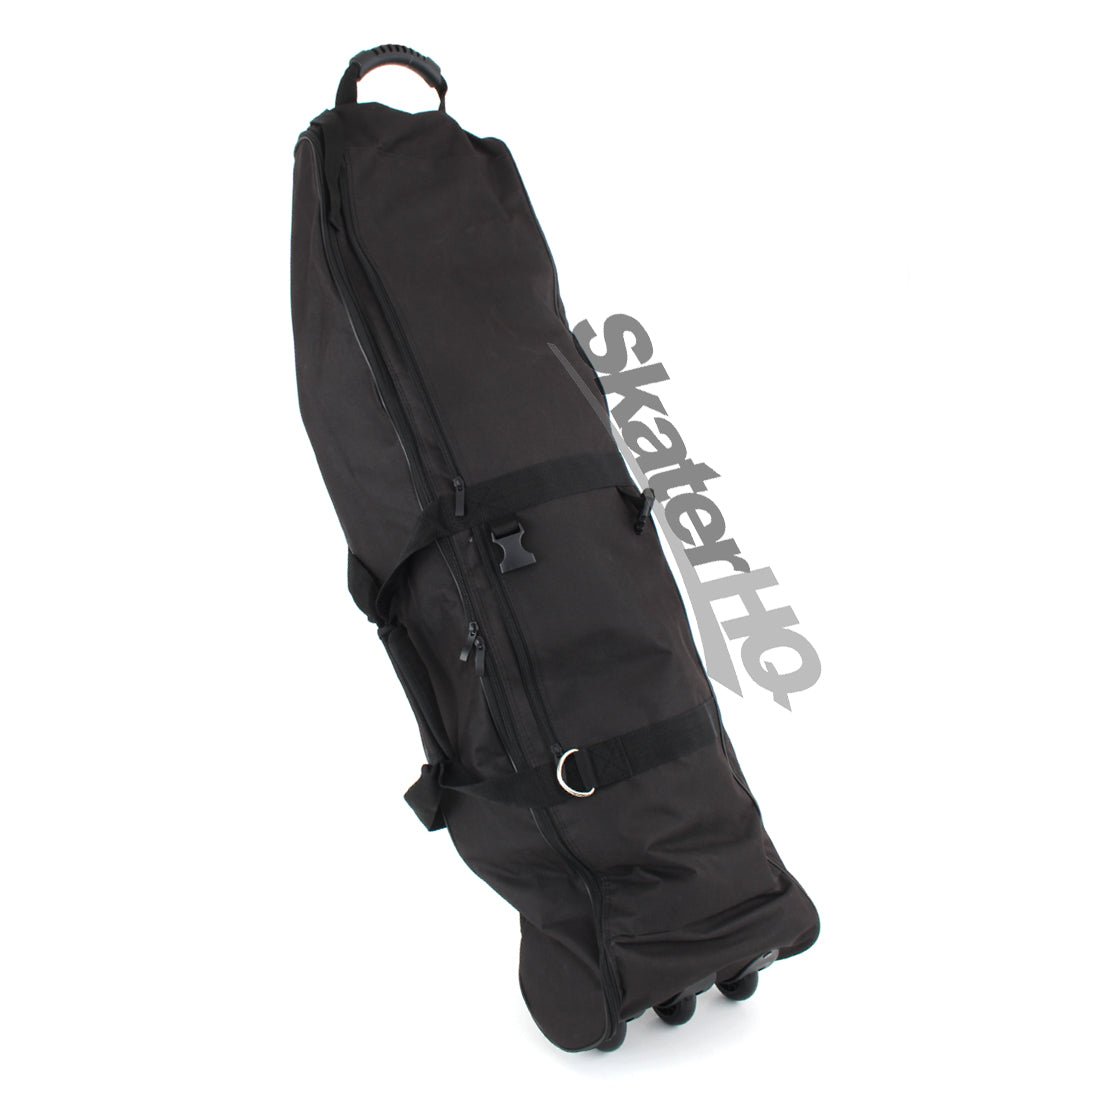 Scooter Wheelie Carrying Bag - Black Scooter Accessories